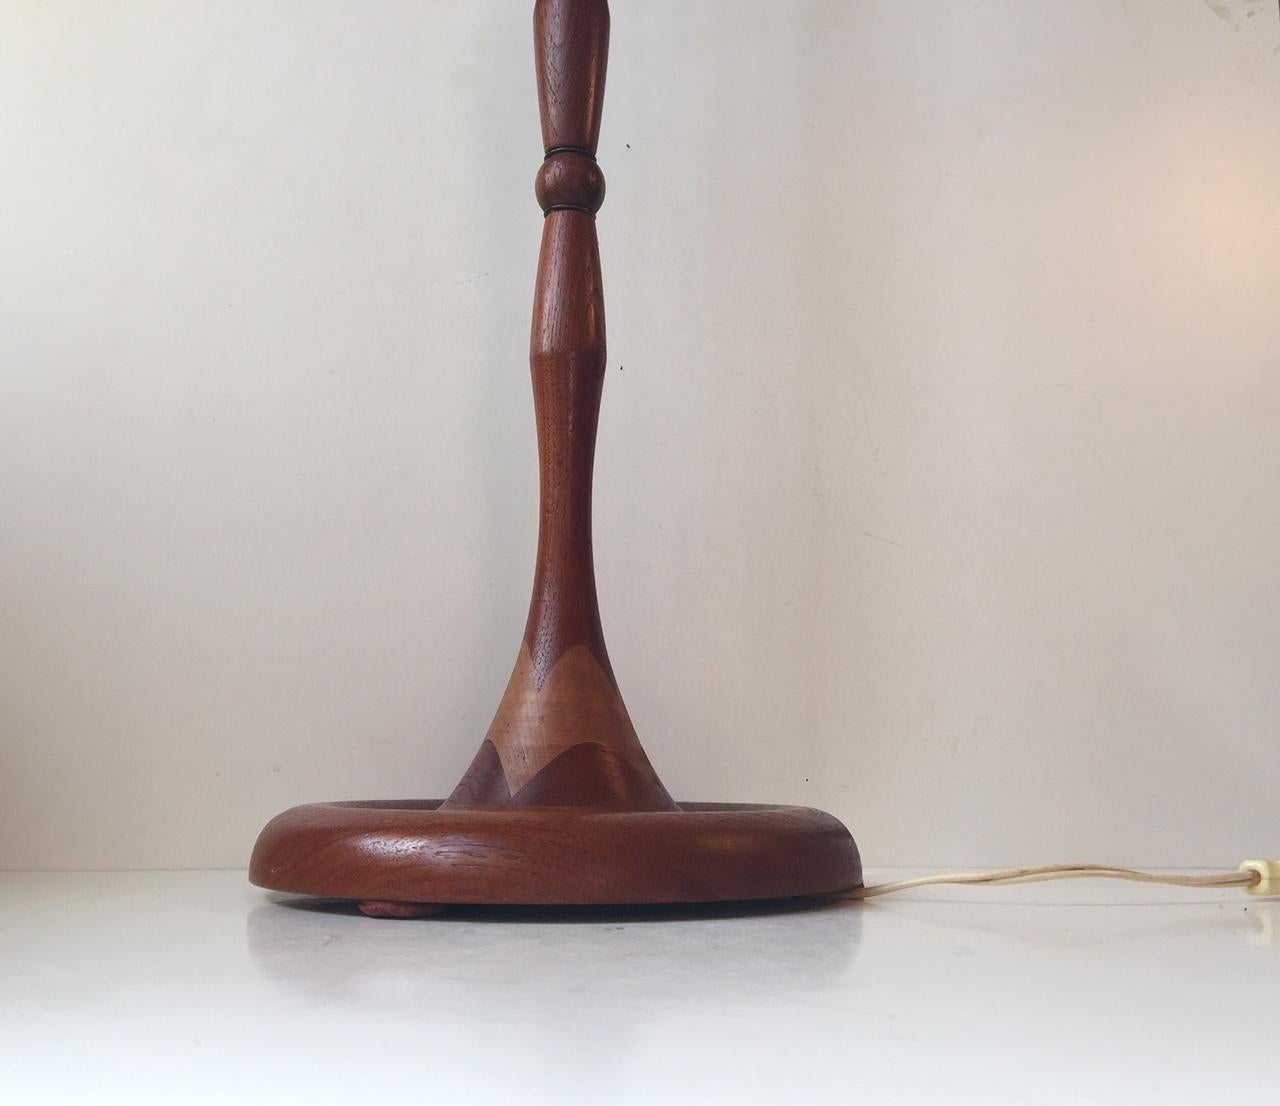 A Scandinavian floor lamp composed of teak joints separated by brass ring. It features cherrywood intarsia to its organically shaped base and an on/of switch beneath the shade. It was manufactured in Denmark or Sweden during the 1960s by an